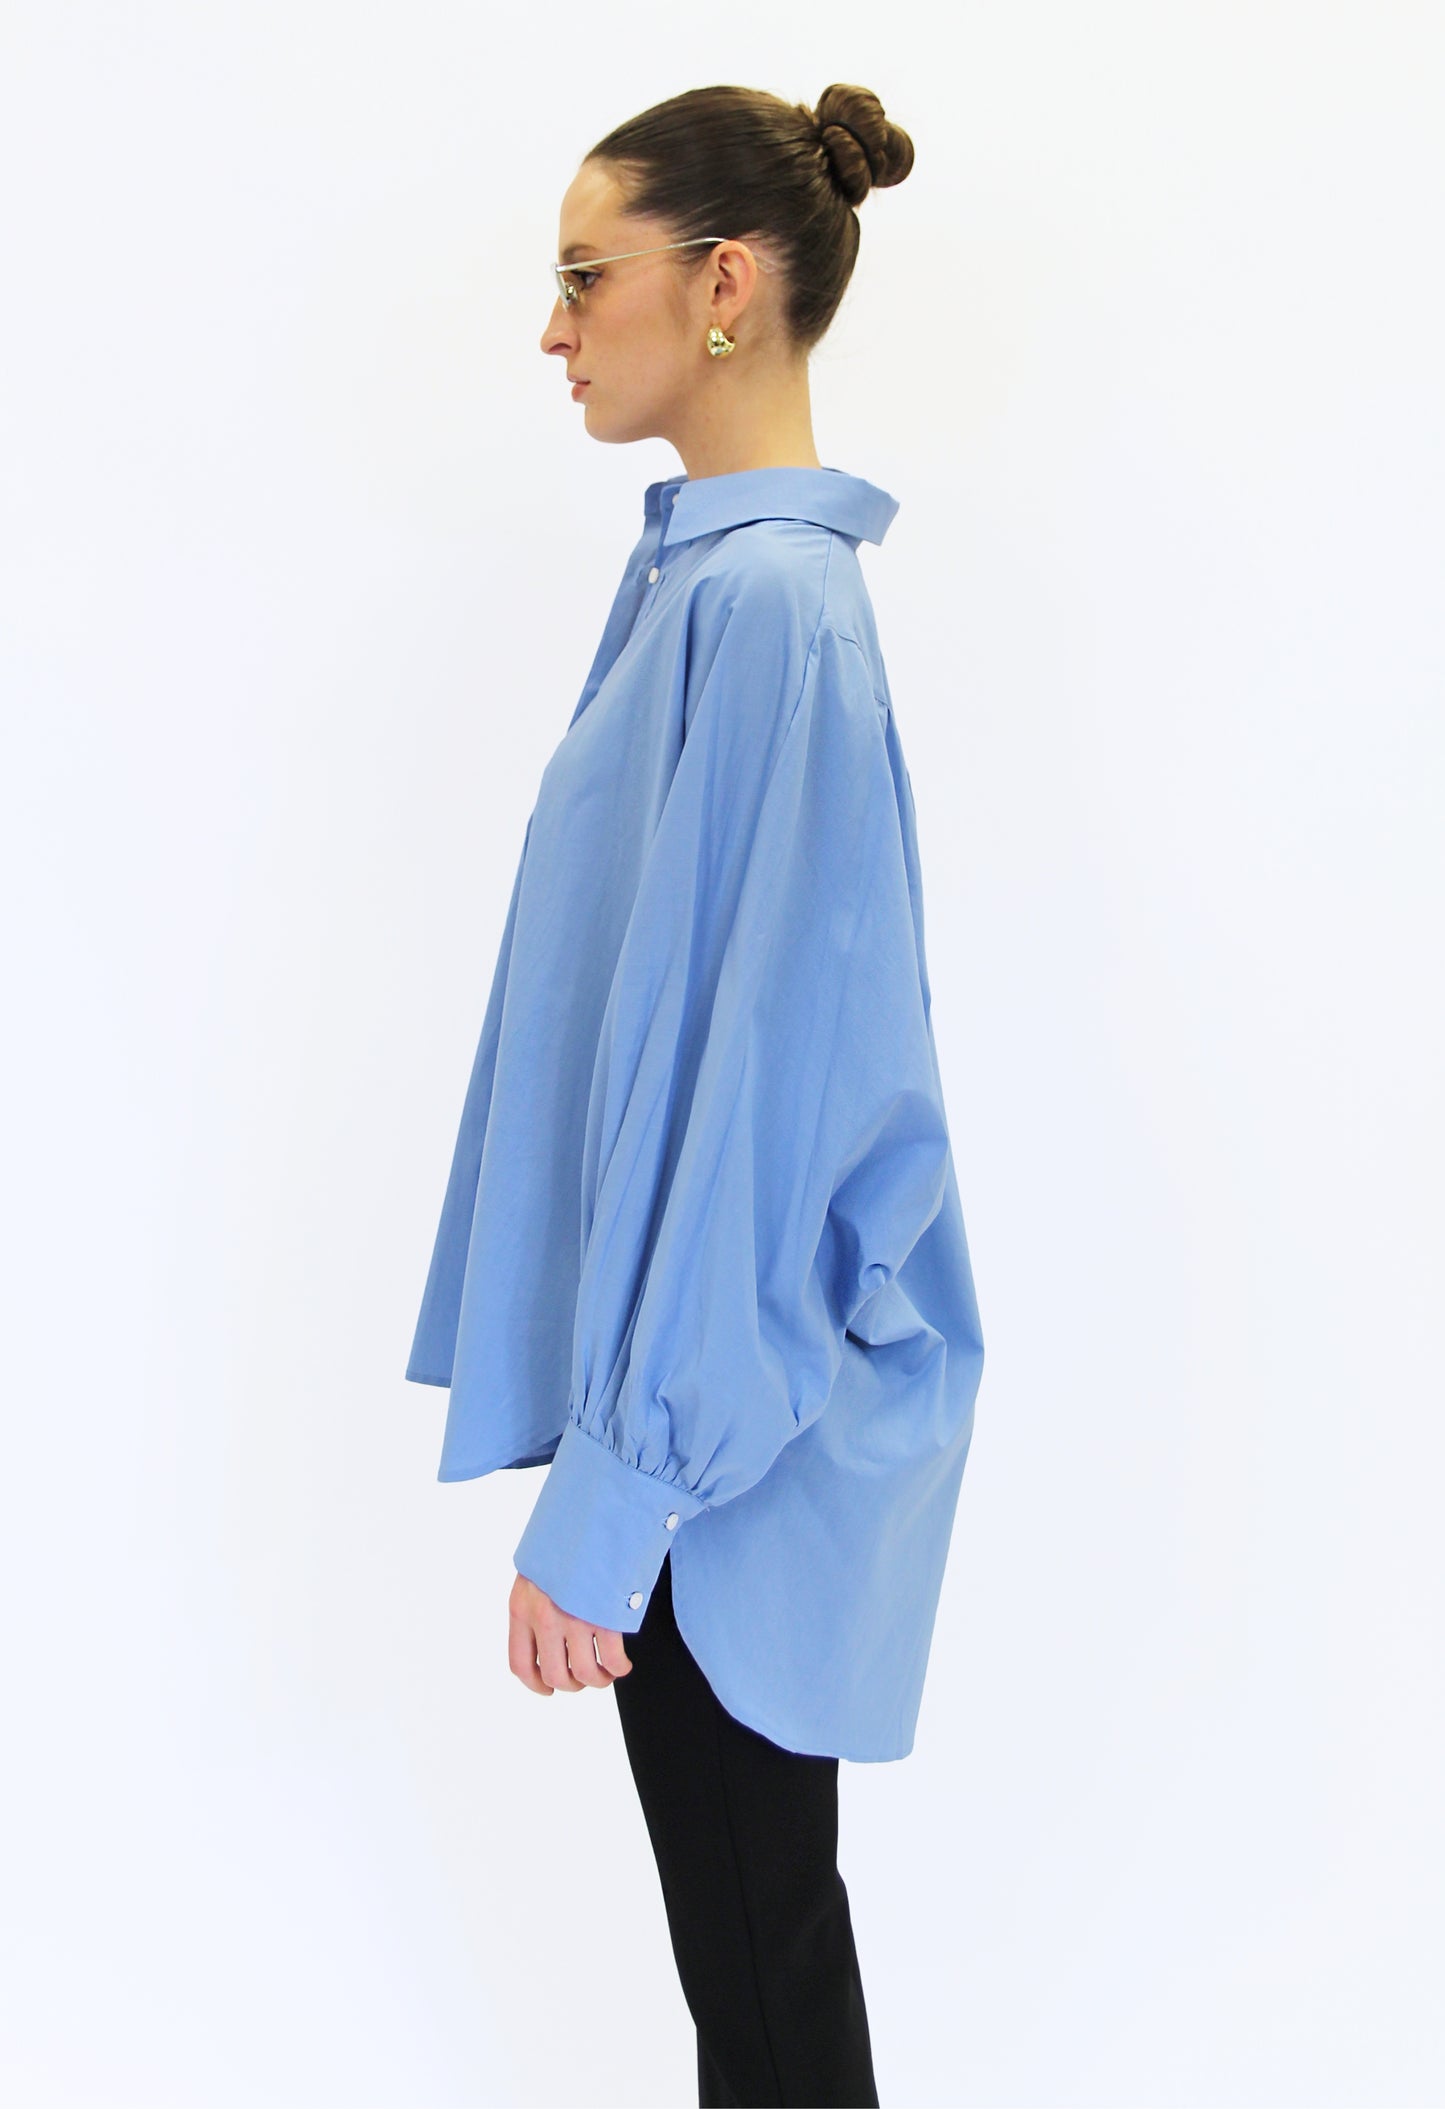 Oversized Button Up in Sky Blue